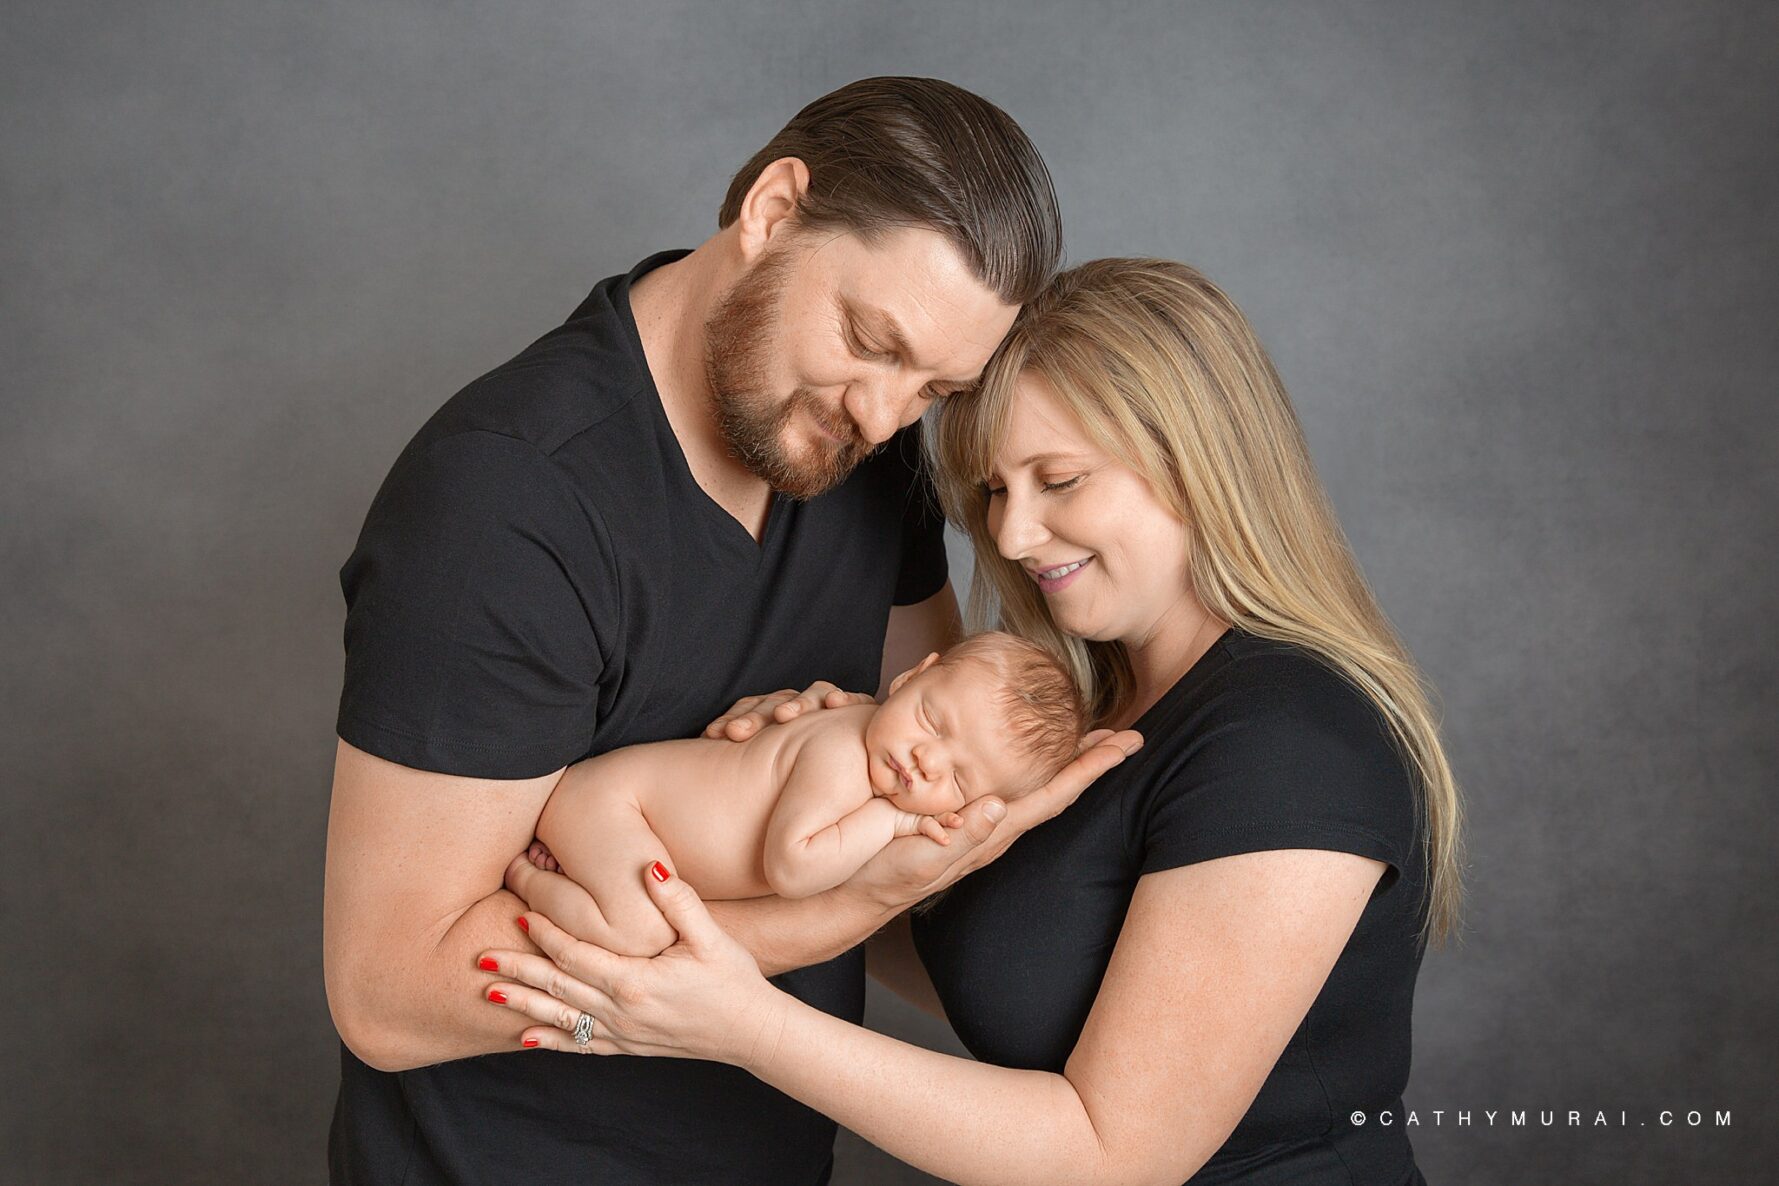 Classic family portrait with a newborn baby.